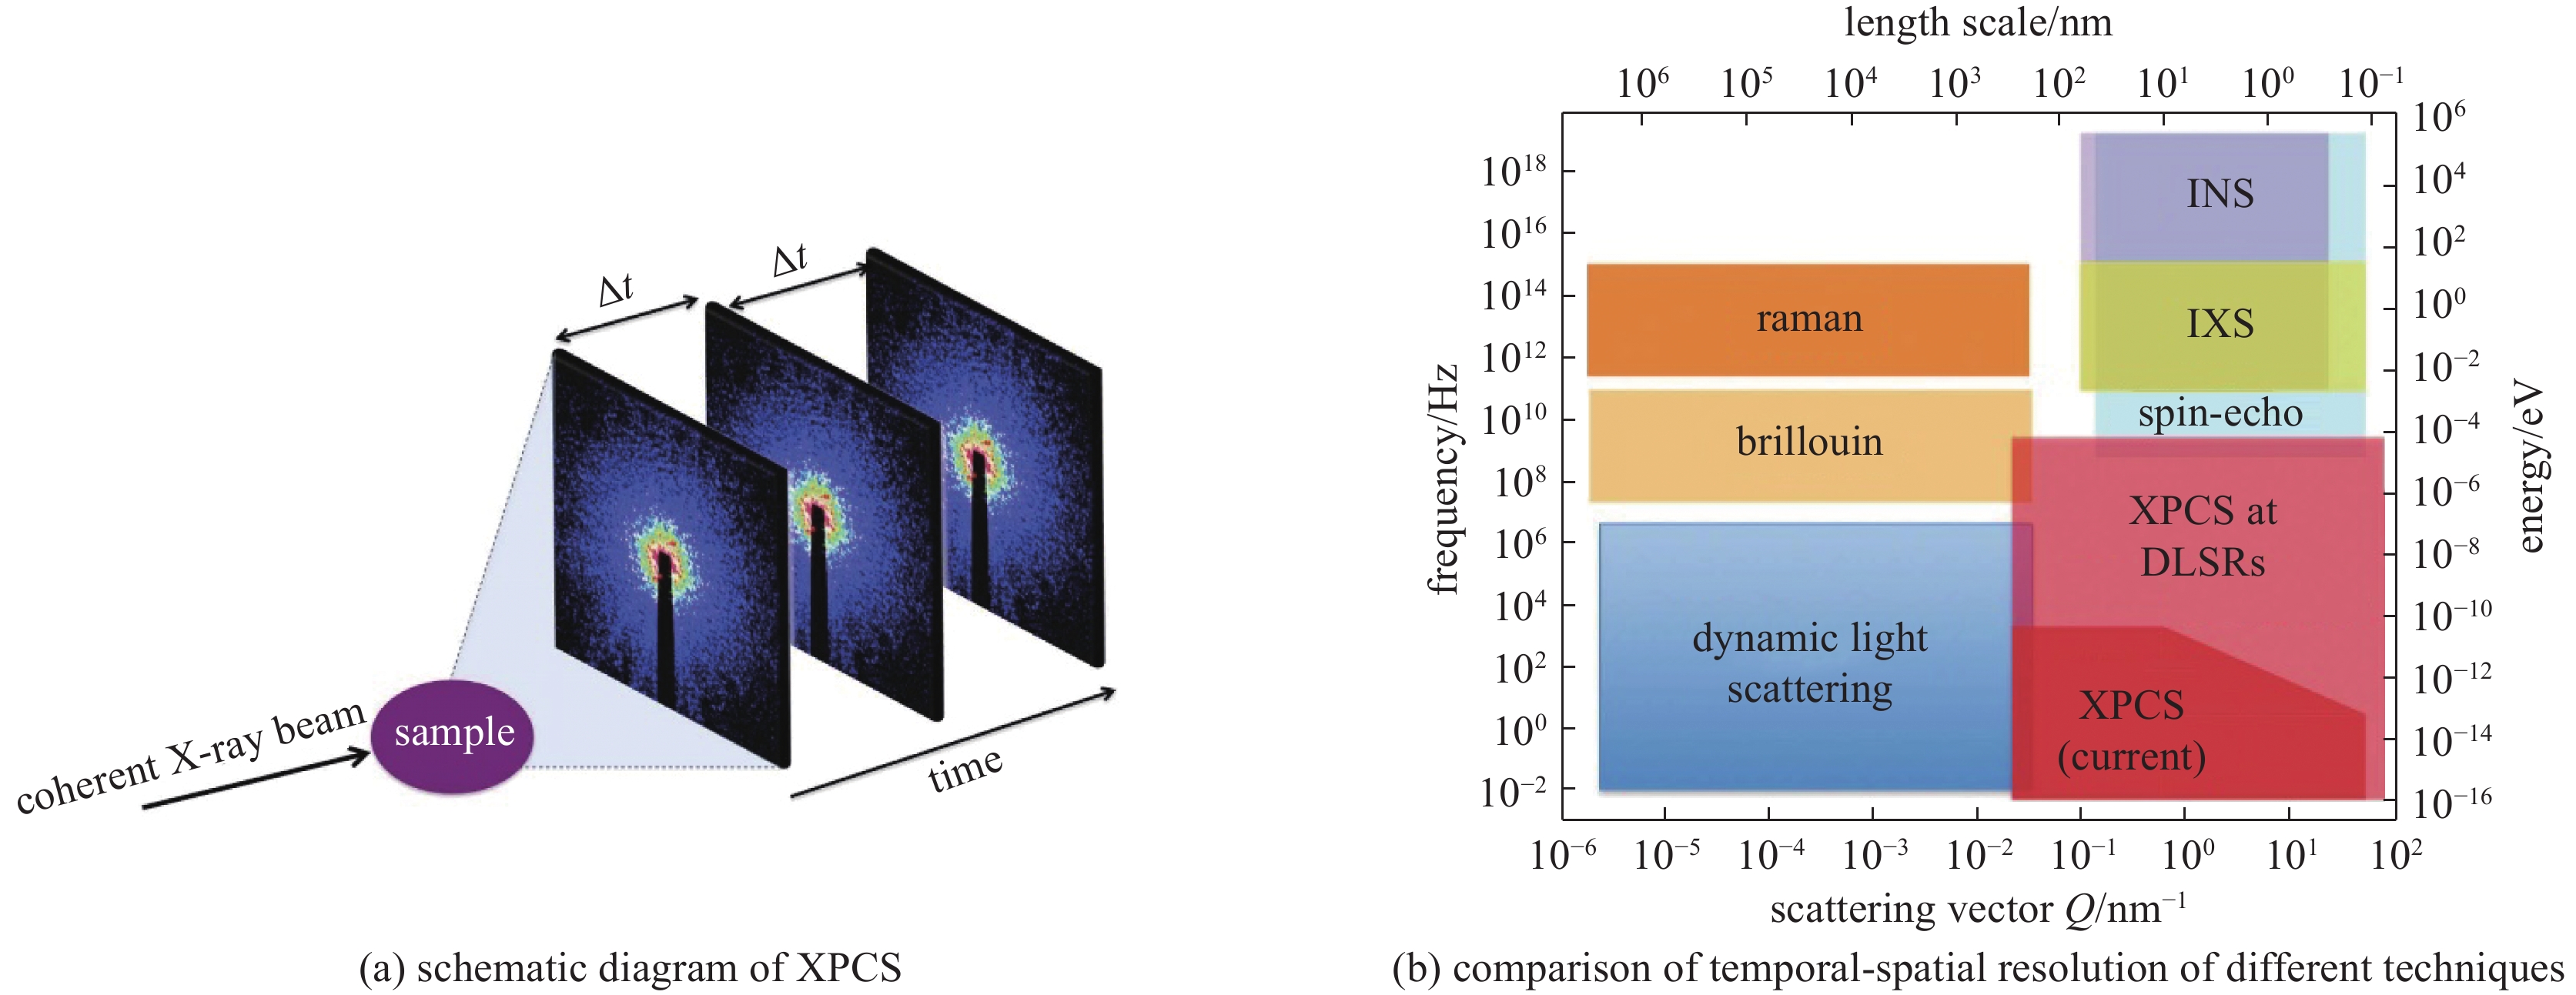 Schematic diagram of XPCS and its temporal-spatial resolution compared with other techniques[13]